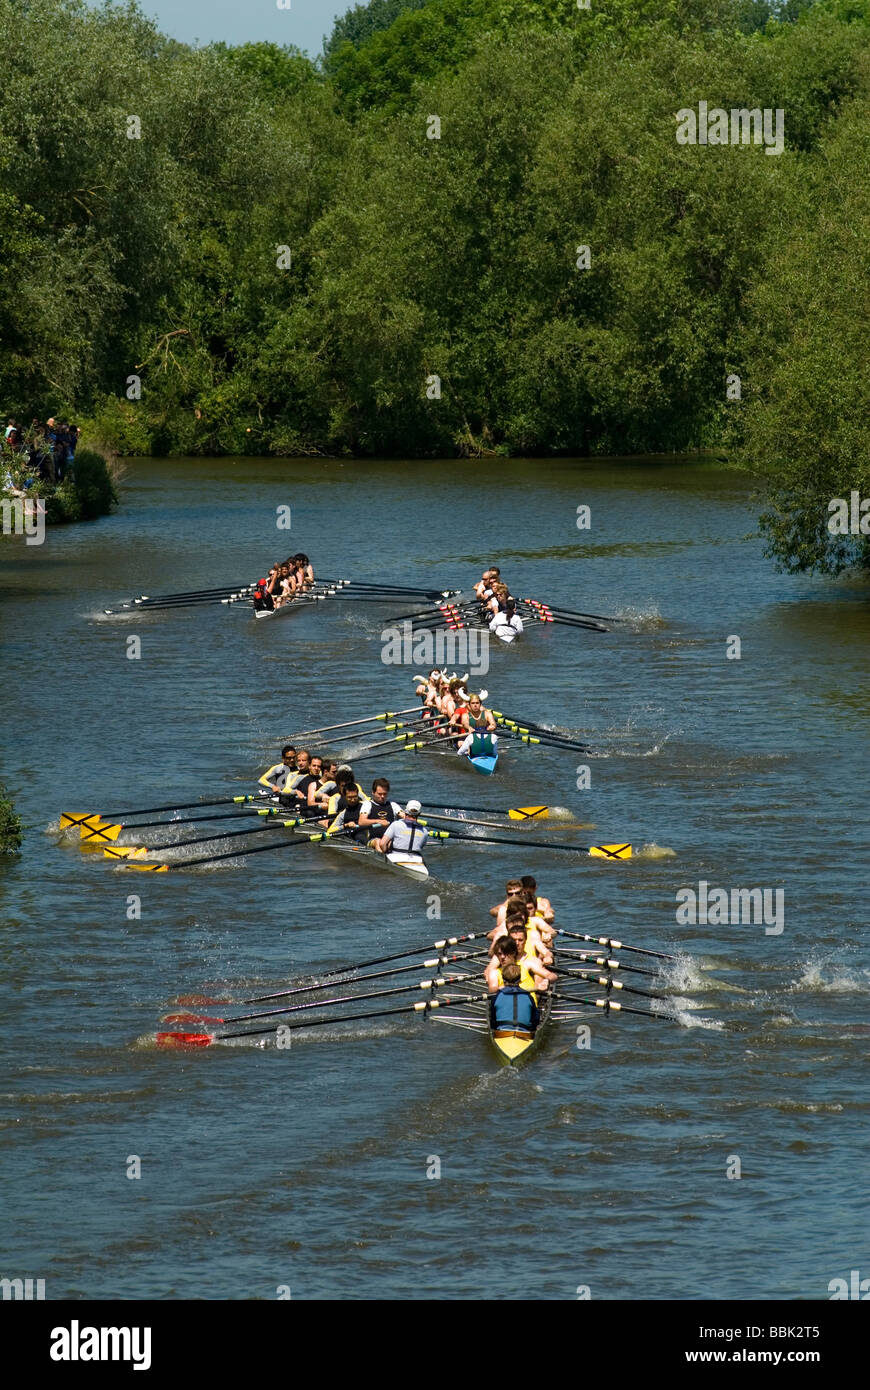 Oxford University Rowing Clubs Eights Week Rowing Race sul Fiume Isis attualmente fiume Tamigi in Oxford Oxfordshire 2009 2000 HOMER SYKES Foto Stock